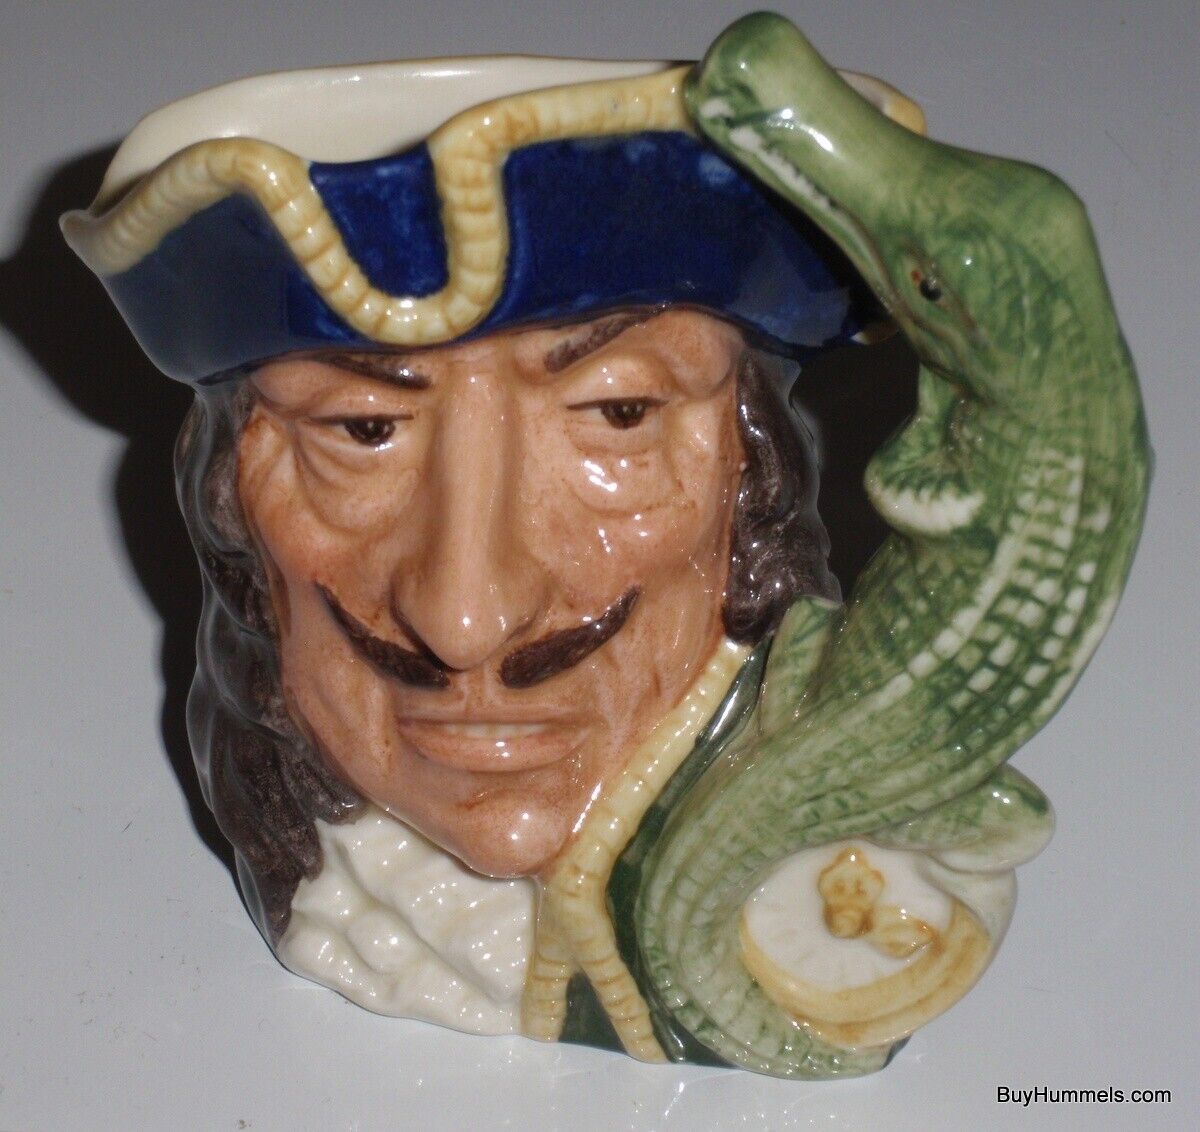 Primary image for Vintage Royal Doulton Character Jug Capt. Hook #D6601 Small 4" Size 1964 - GIFT!